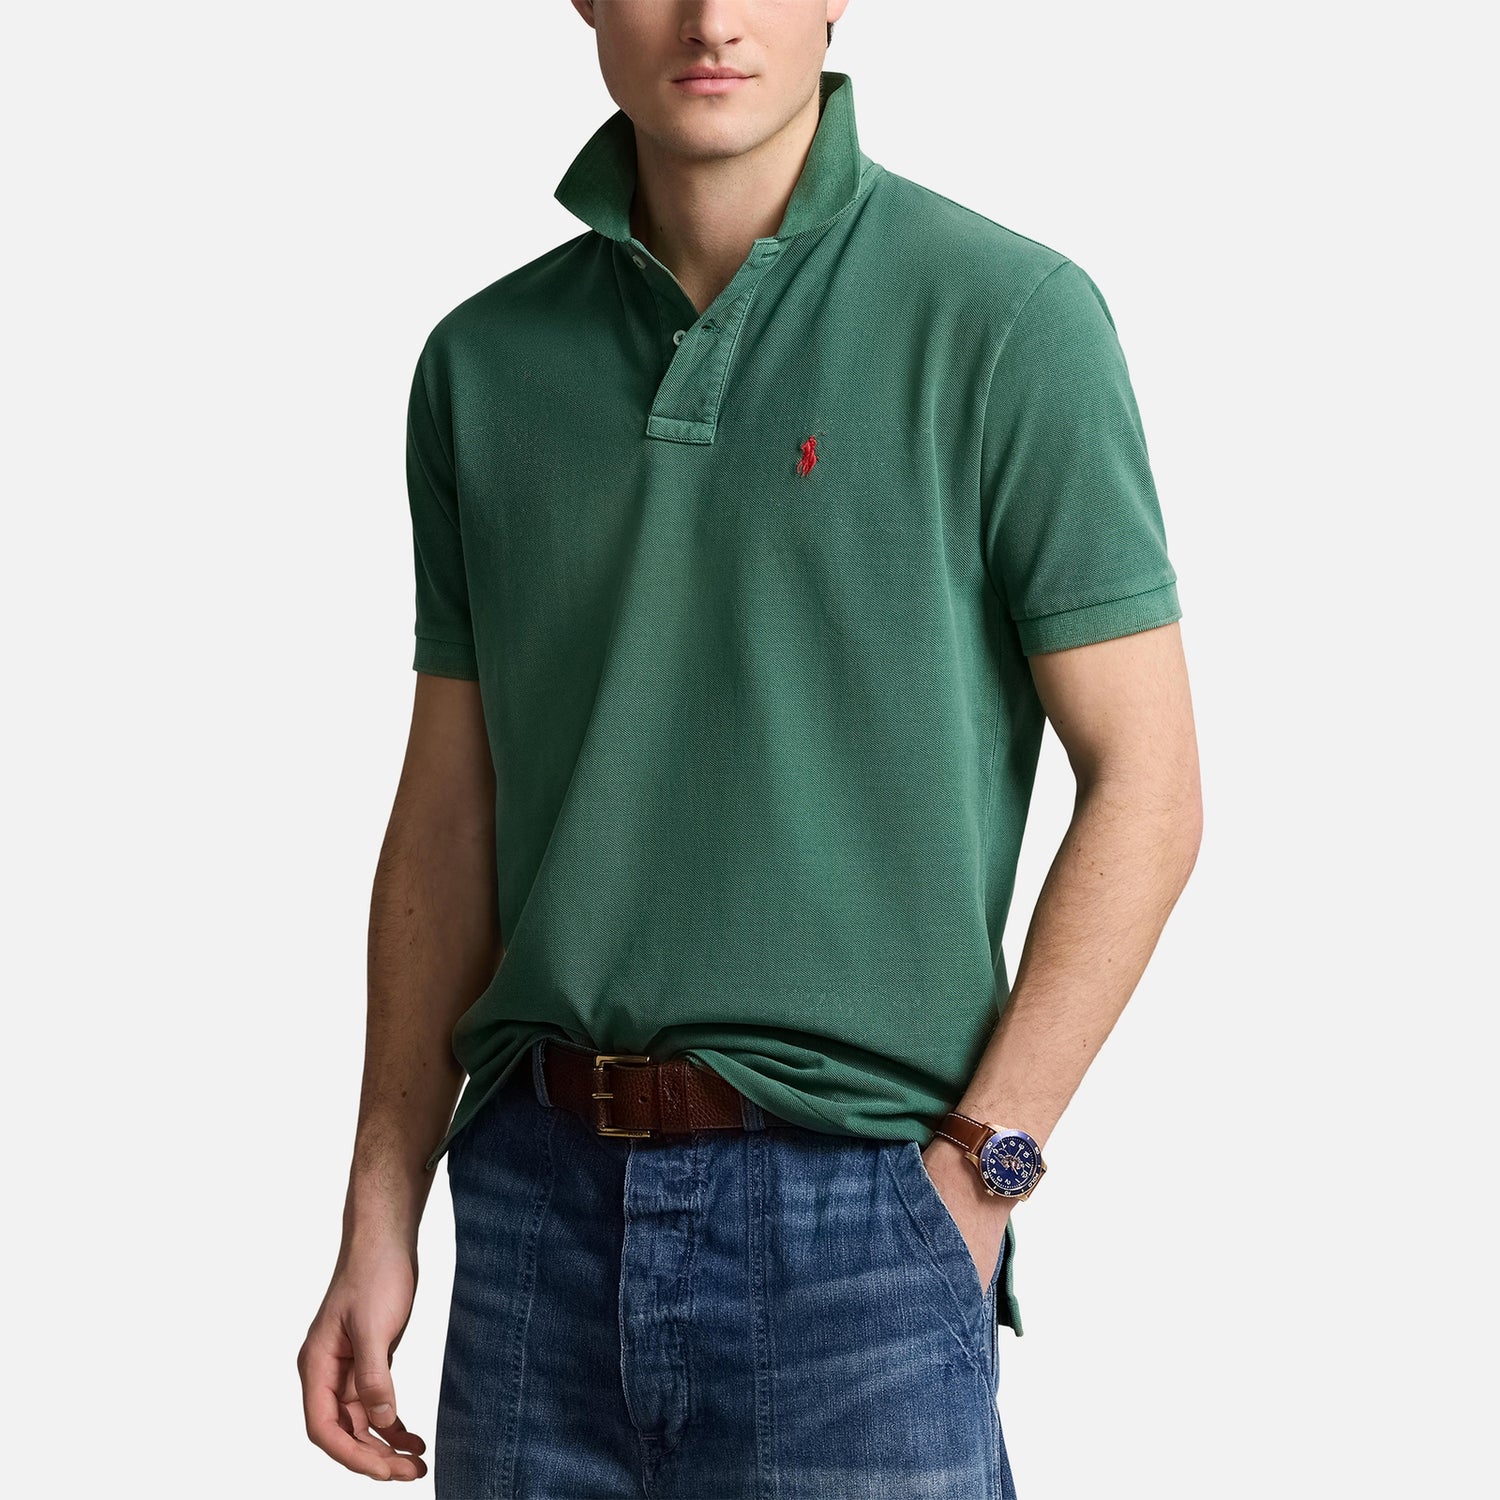 Polo Ralph Lauren Washed Cotton Polo Shirt - S